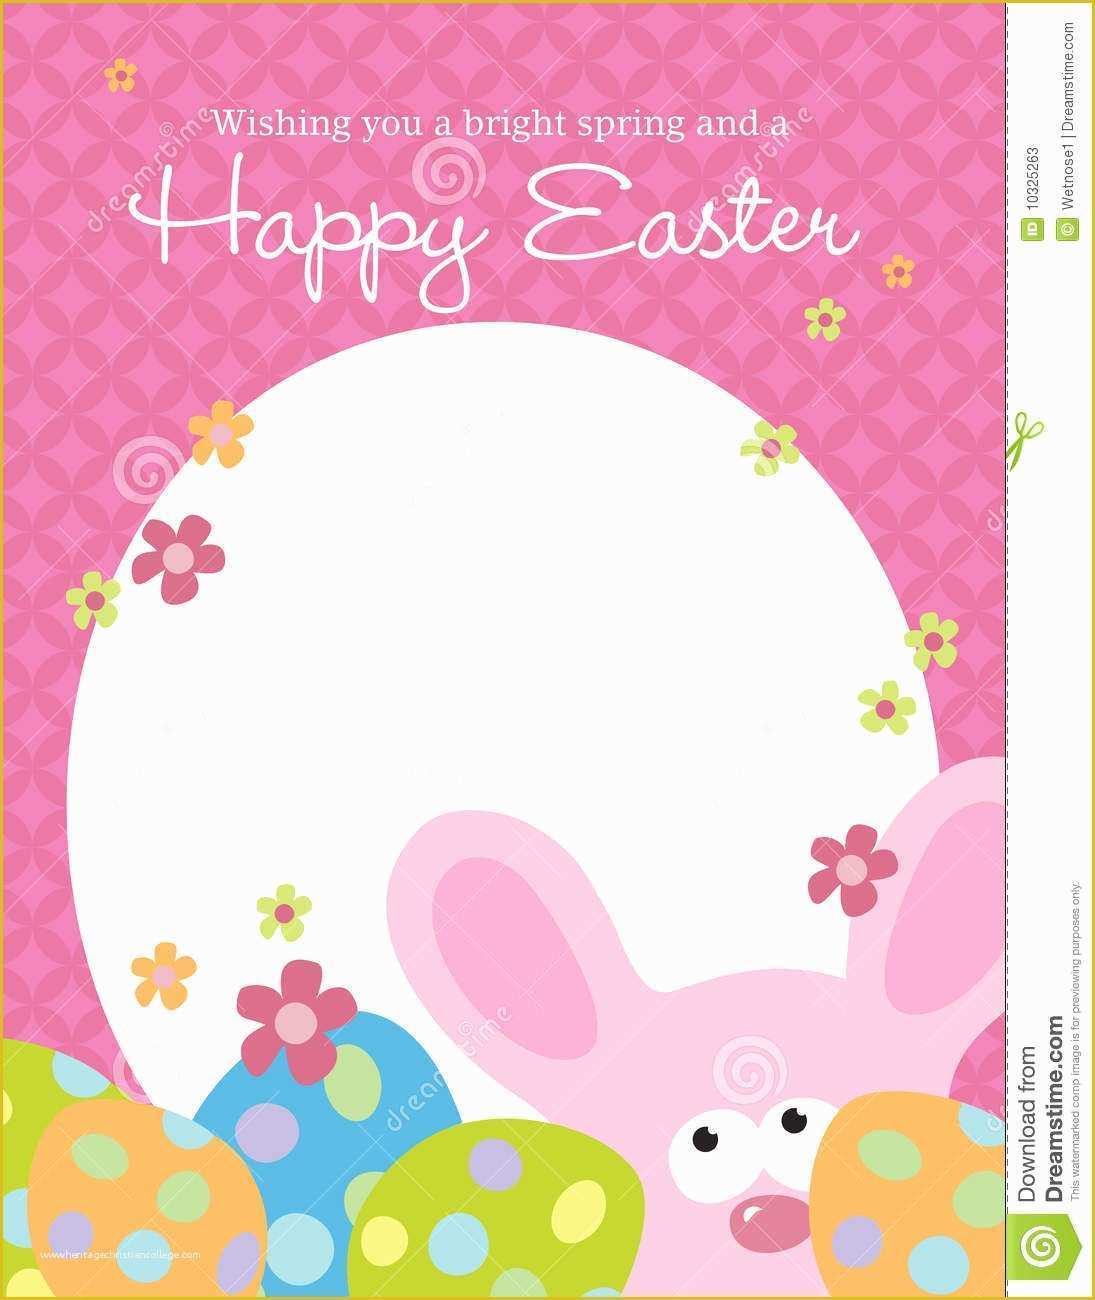 8.5 X 11 Flyer Template Free Of 8 5x11 Easter Flyer Stock Vector Illustration Of Colored